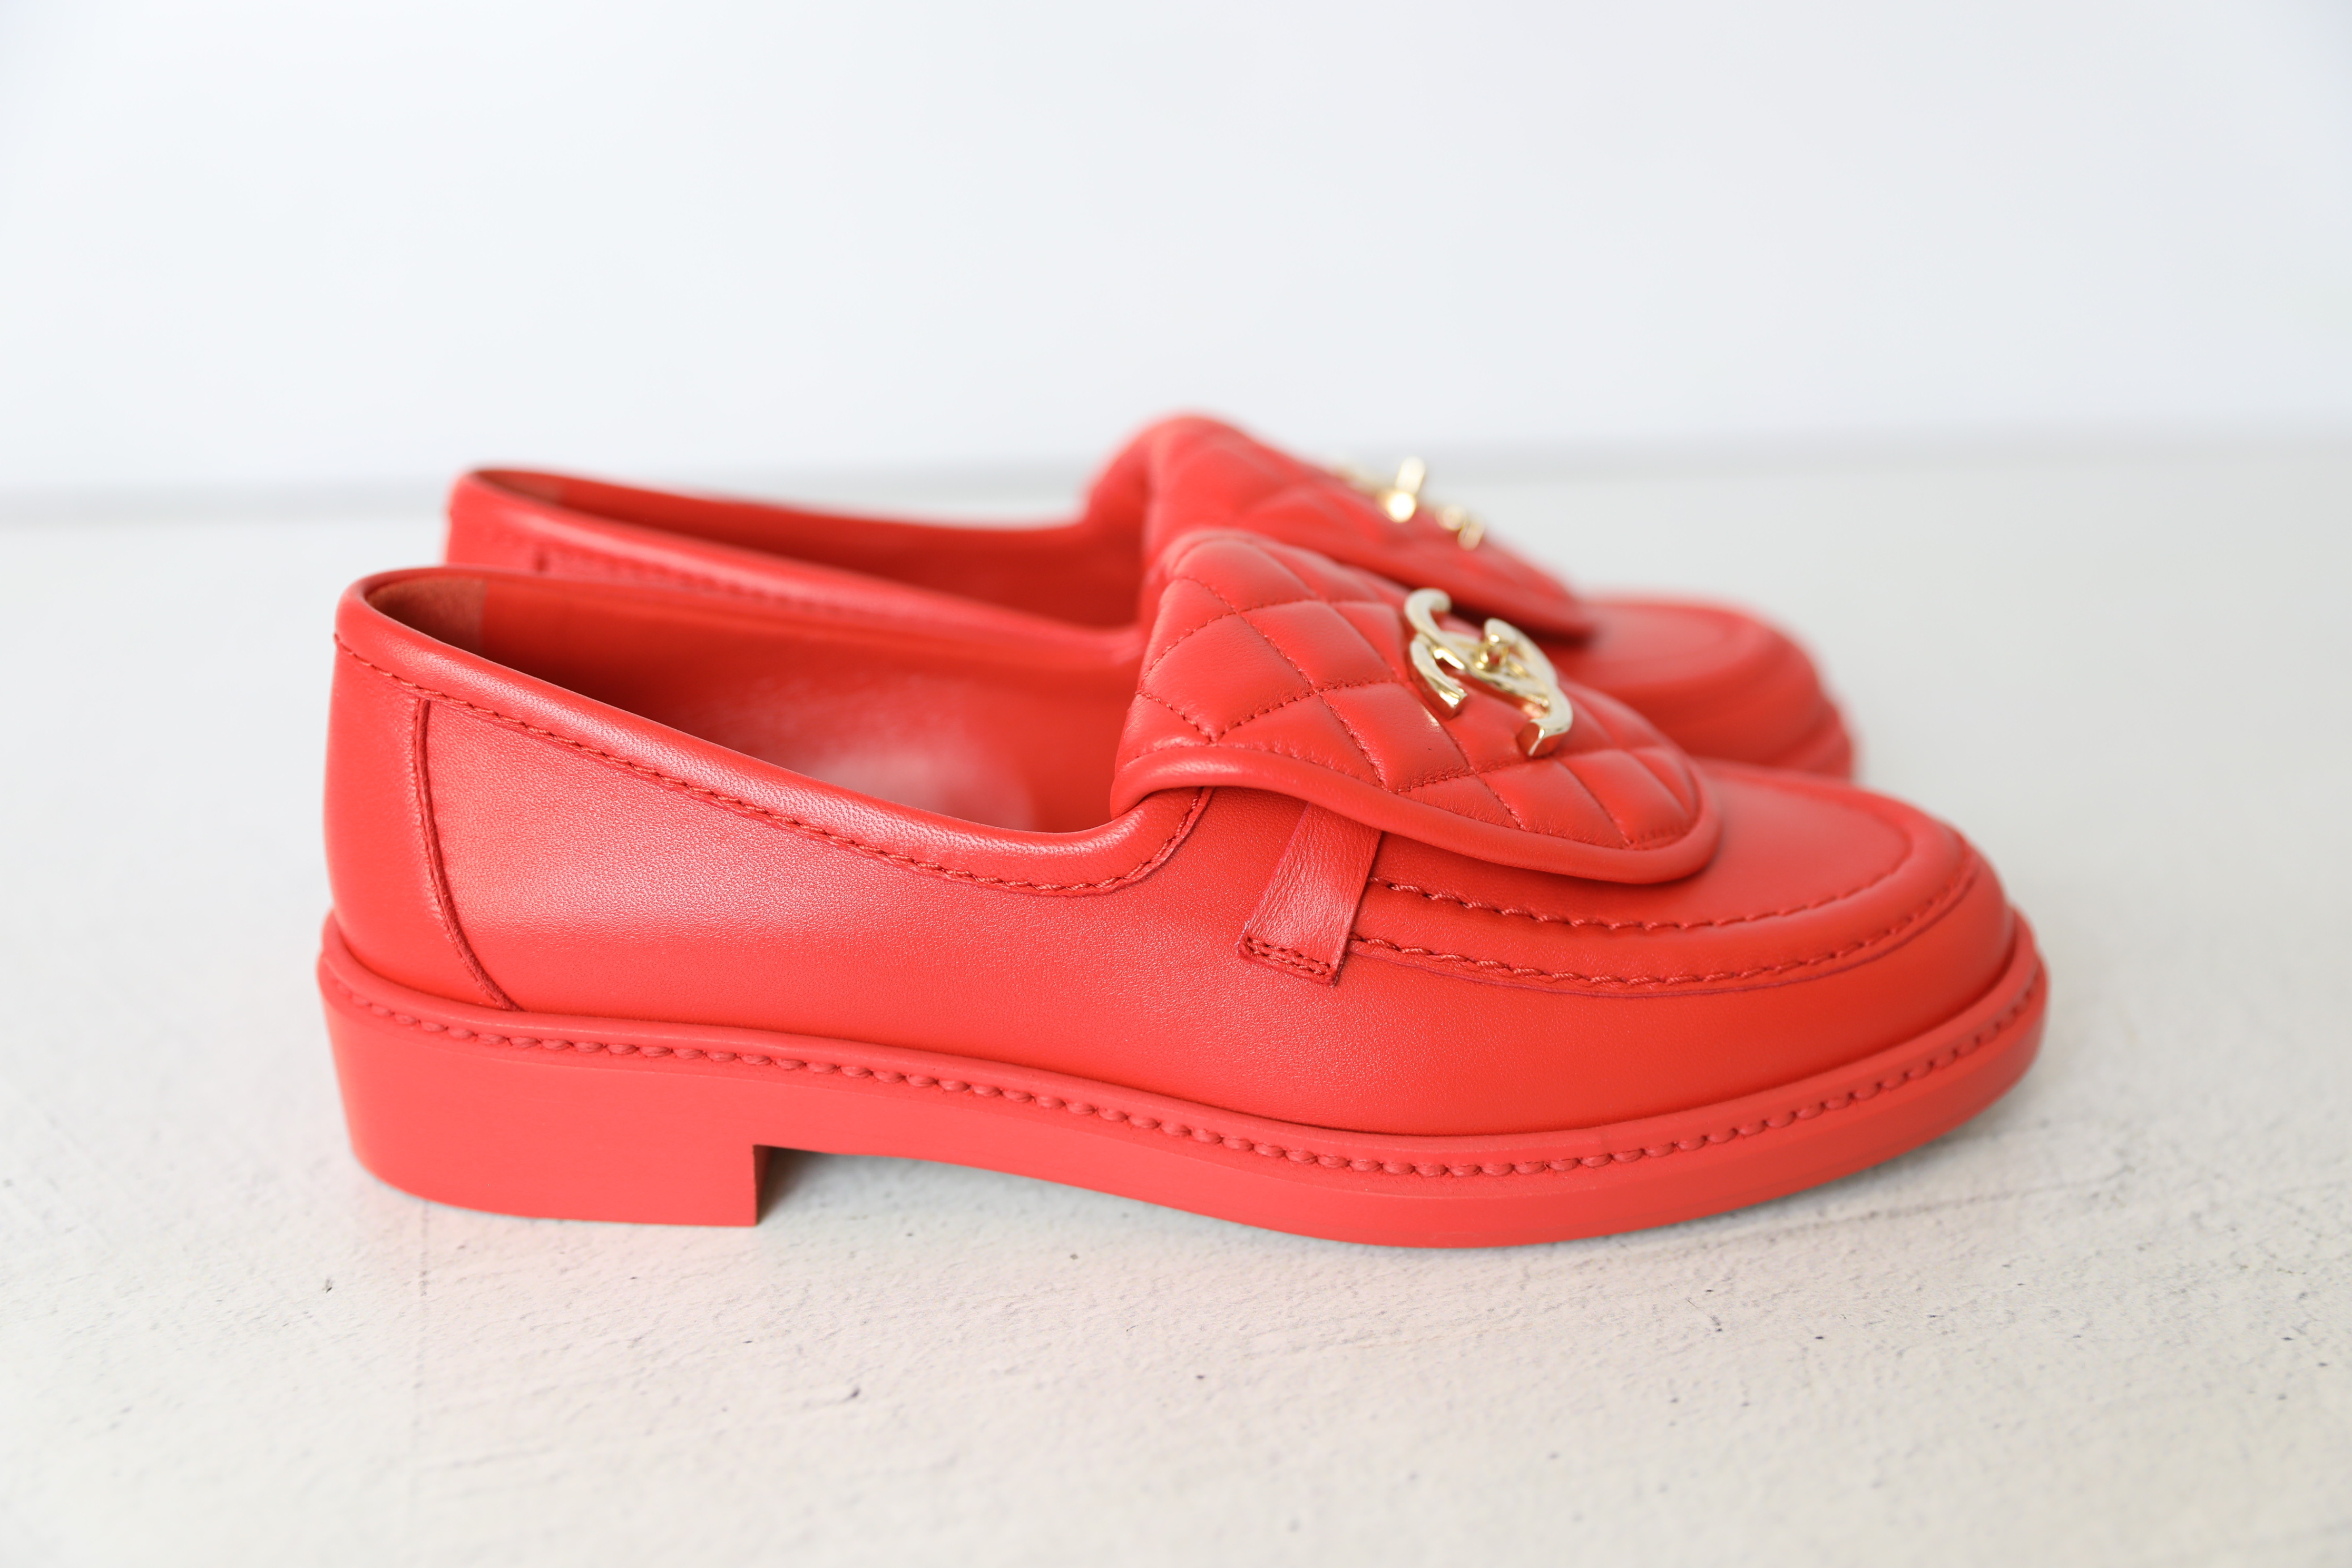 Chanel Turnlock Loafers, Red, Size 37, New in Box WA001